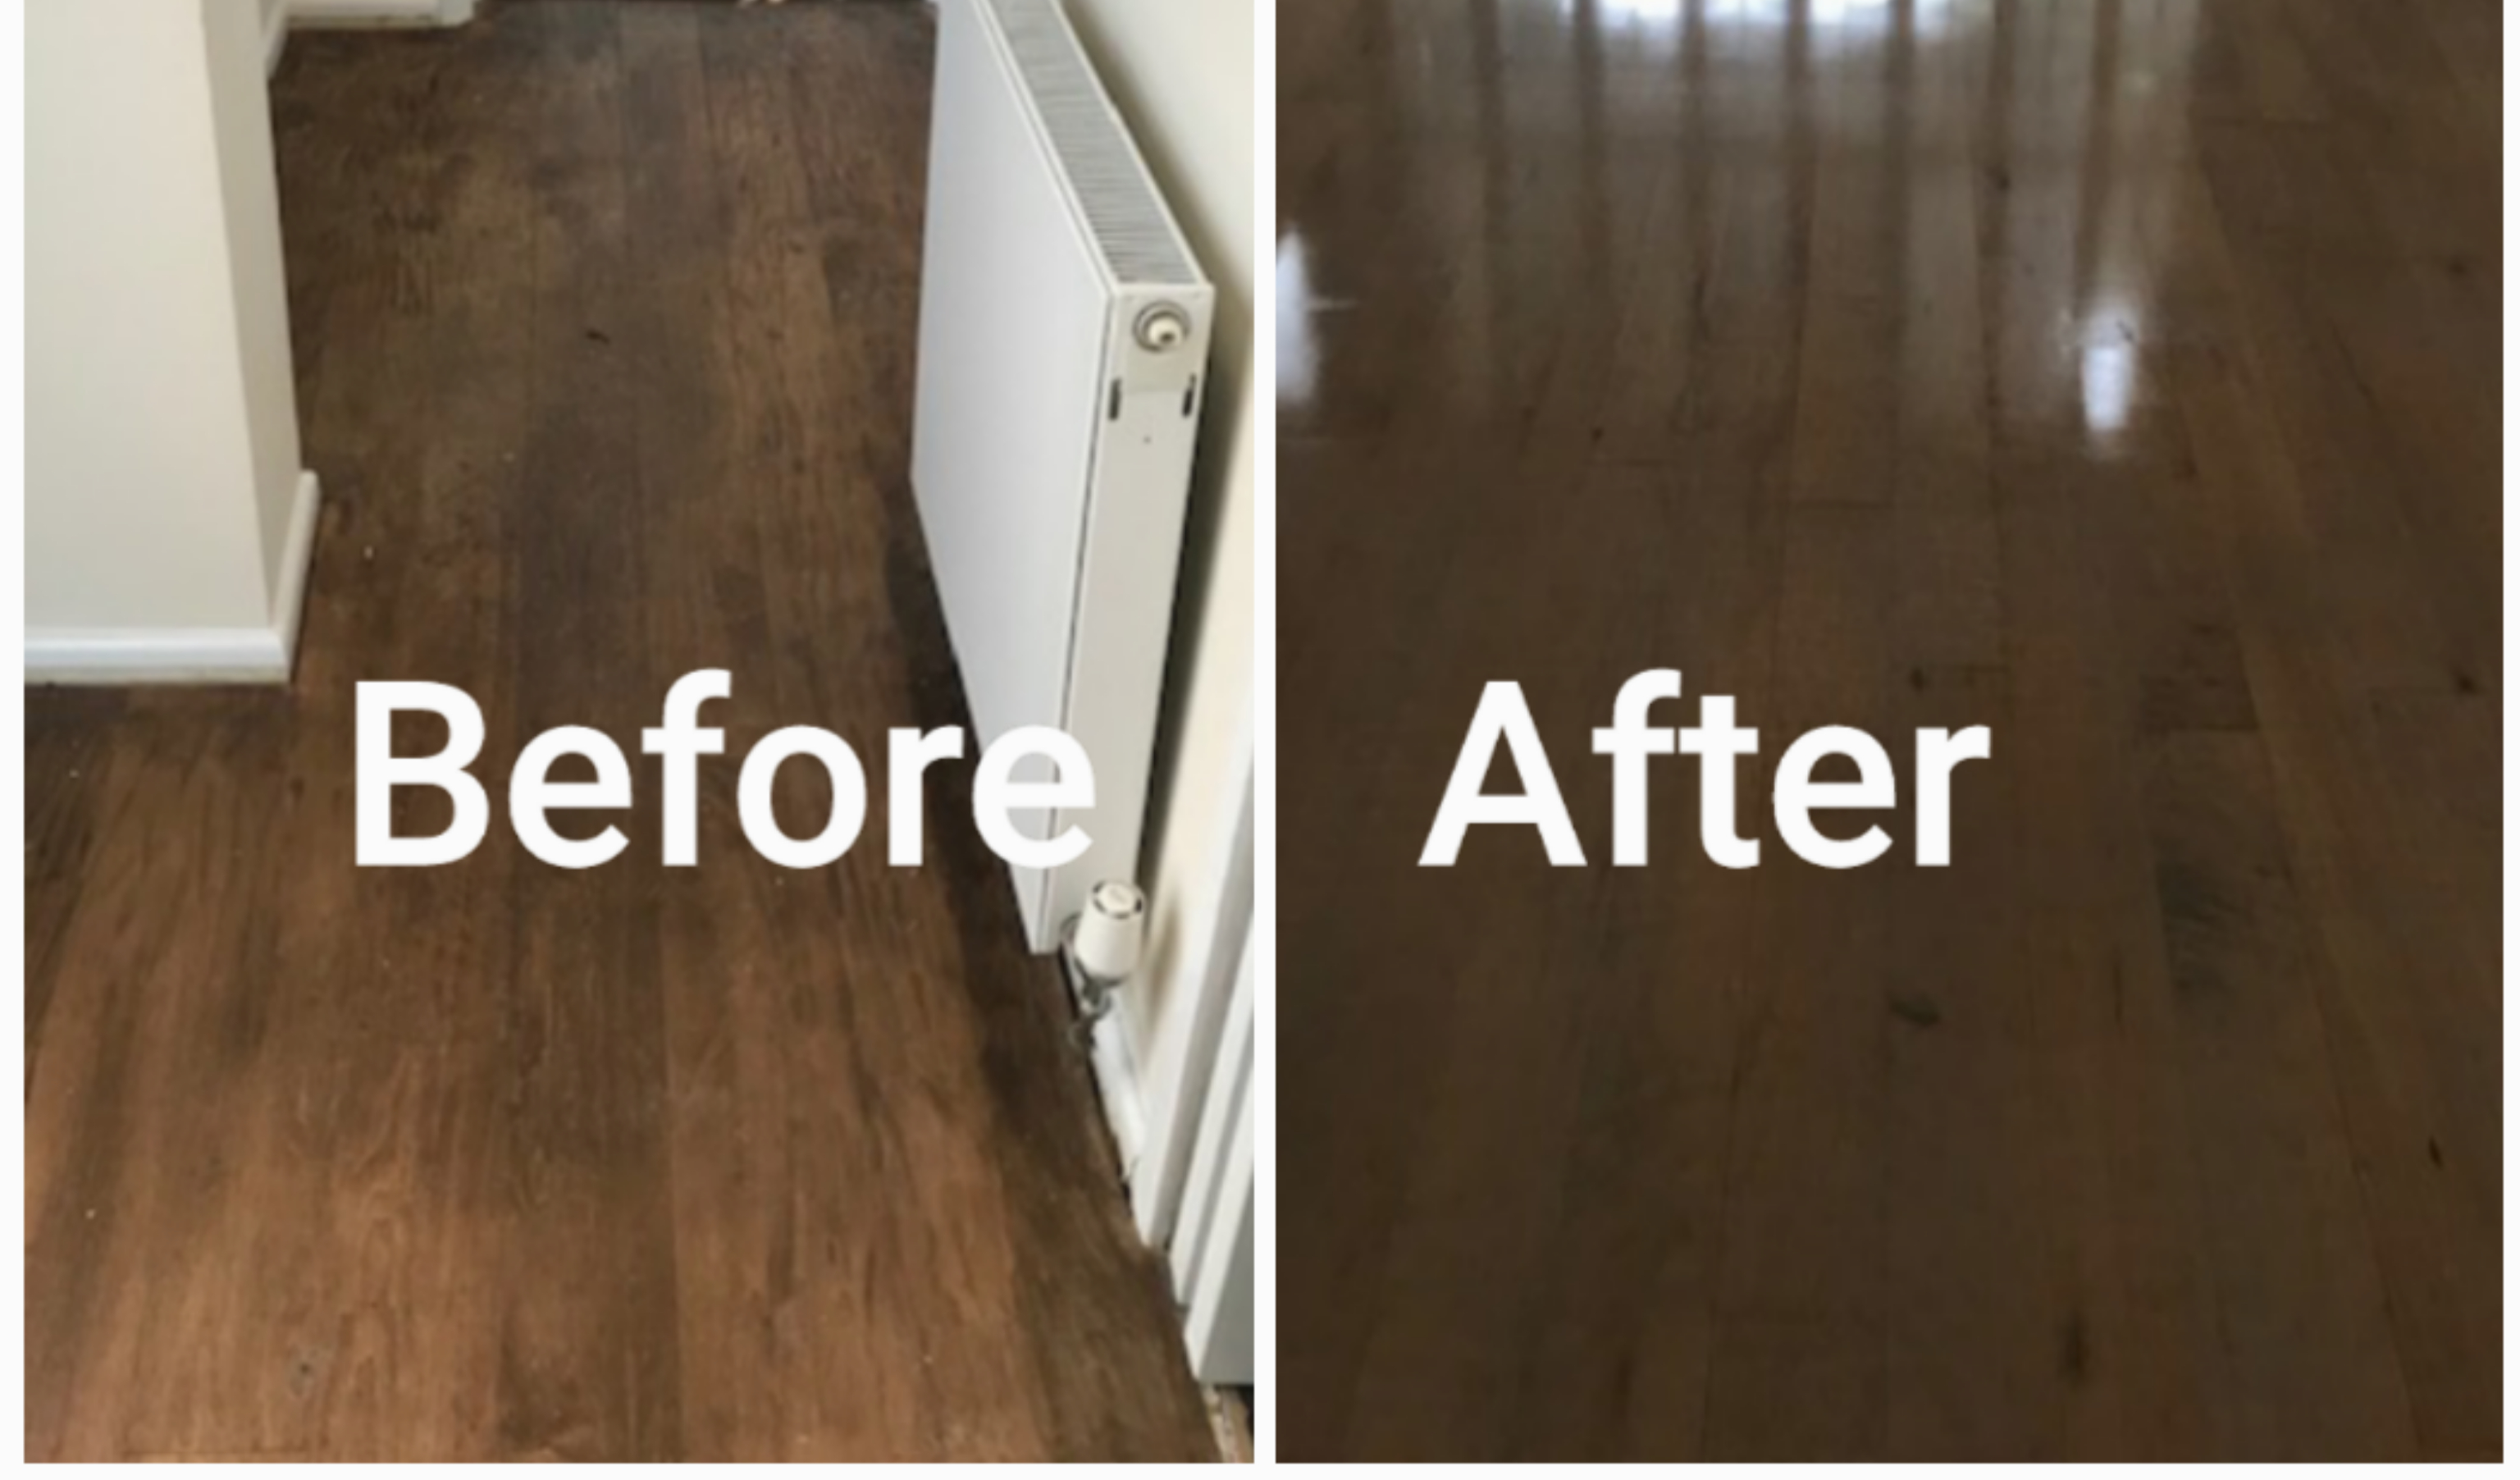 Dustless sanding and sealing with lacquer, Windsor